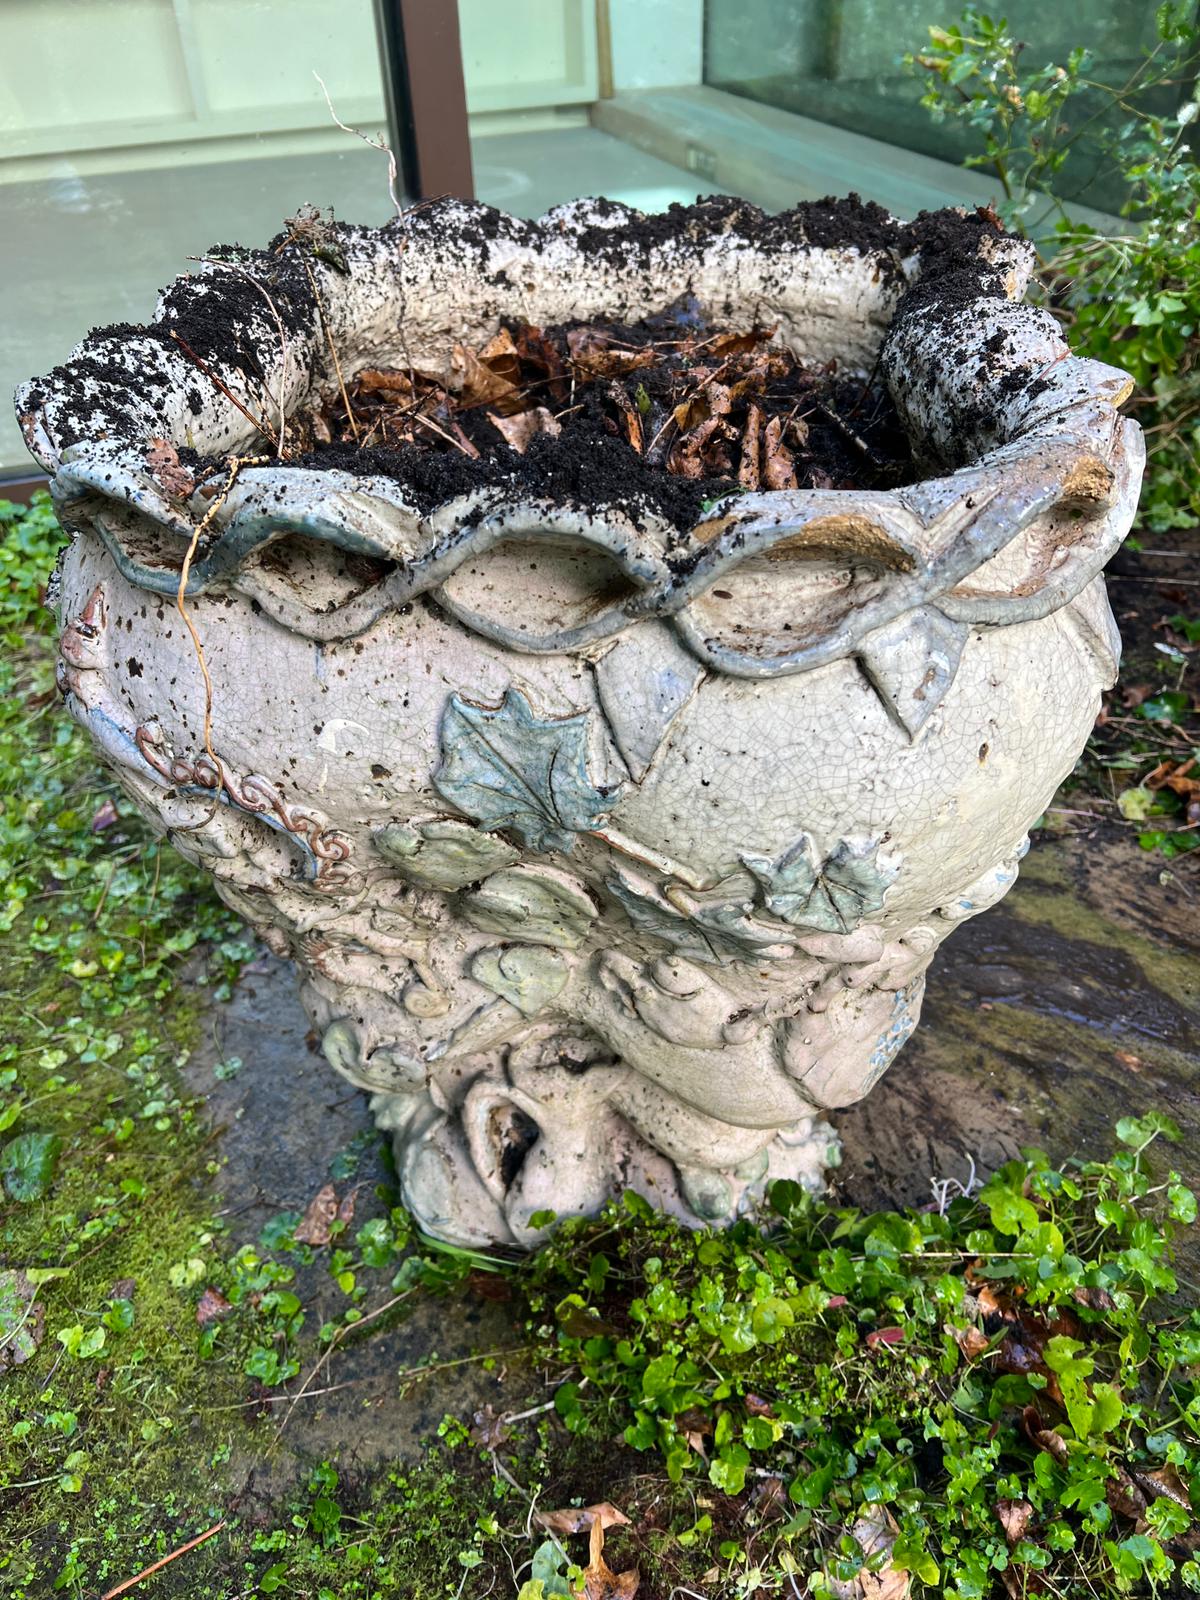 A glazed ceramic planter with platted design around the top and natural scene including a clock in a